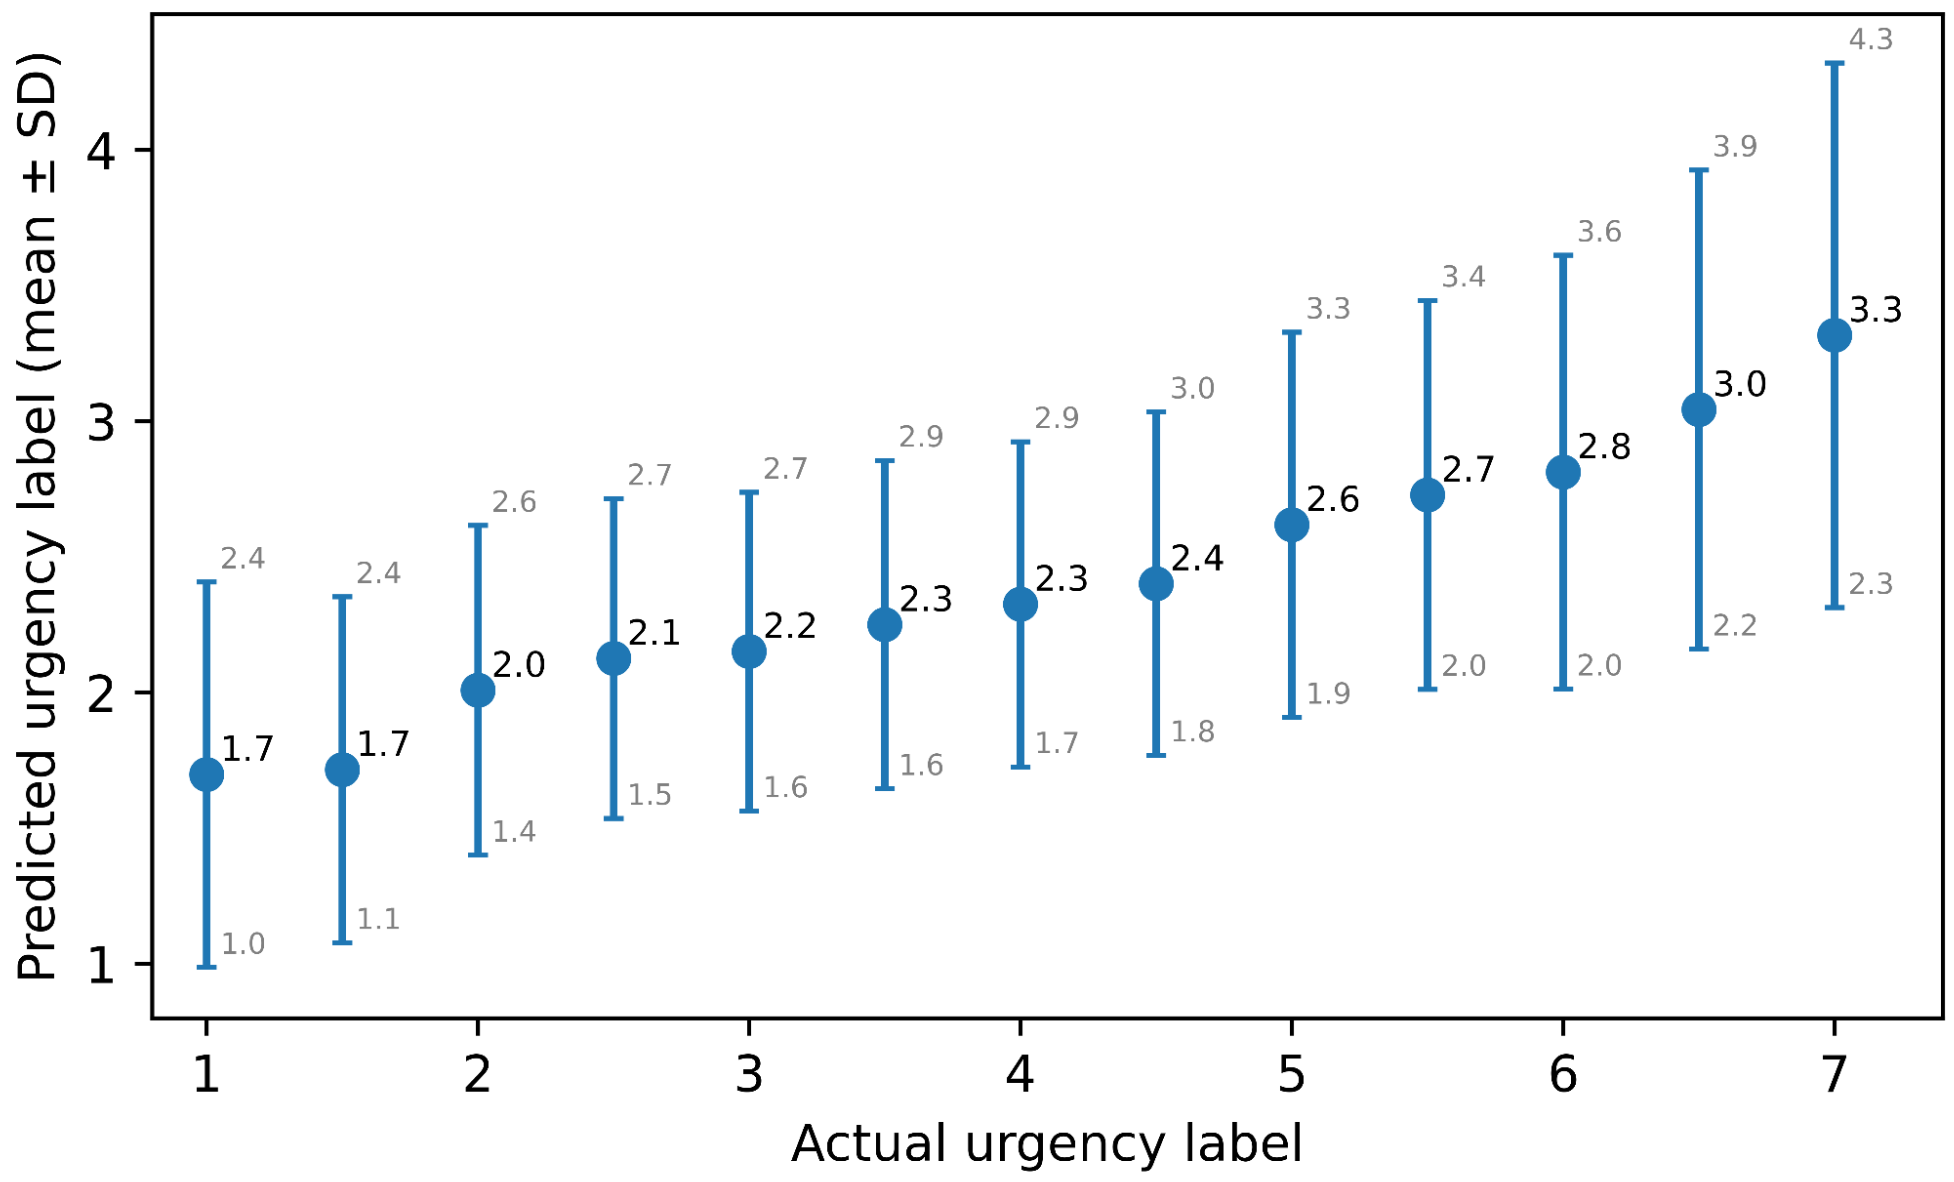 Plot showing the average predicted labels, plus or minus the standard deviation, for SVR with USE features.